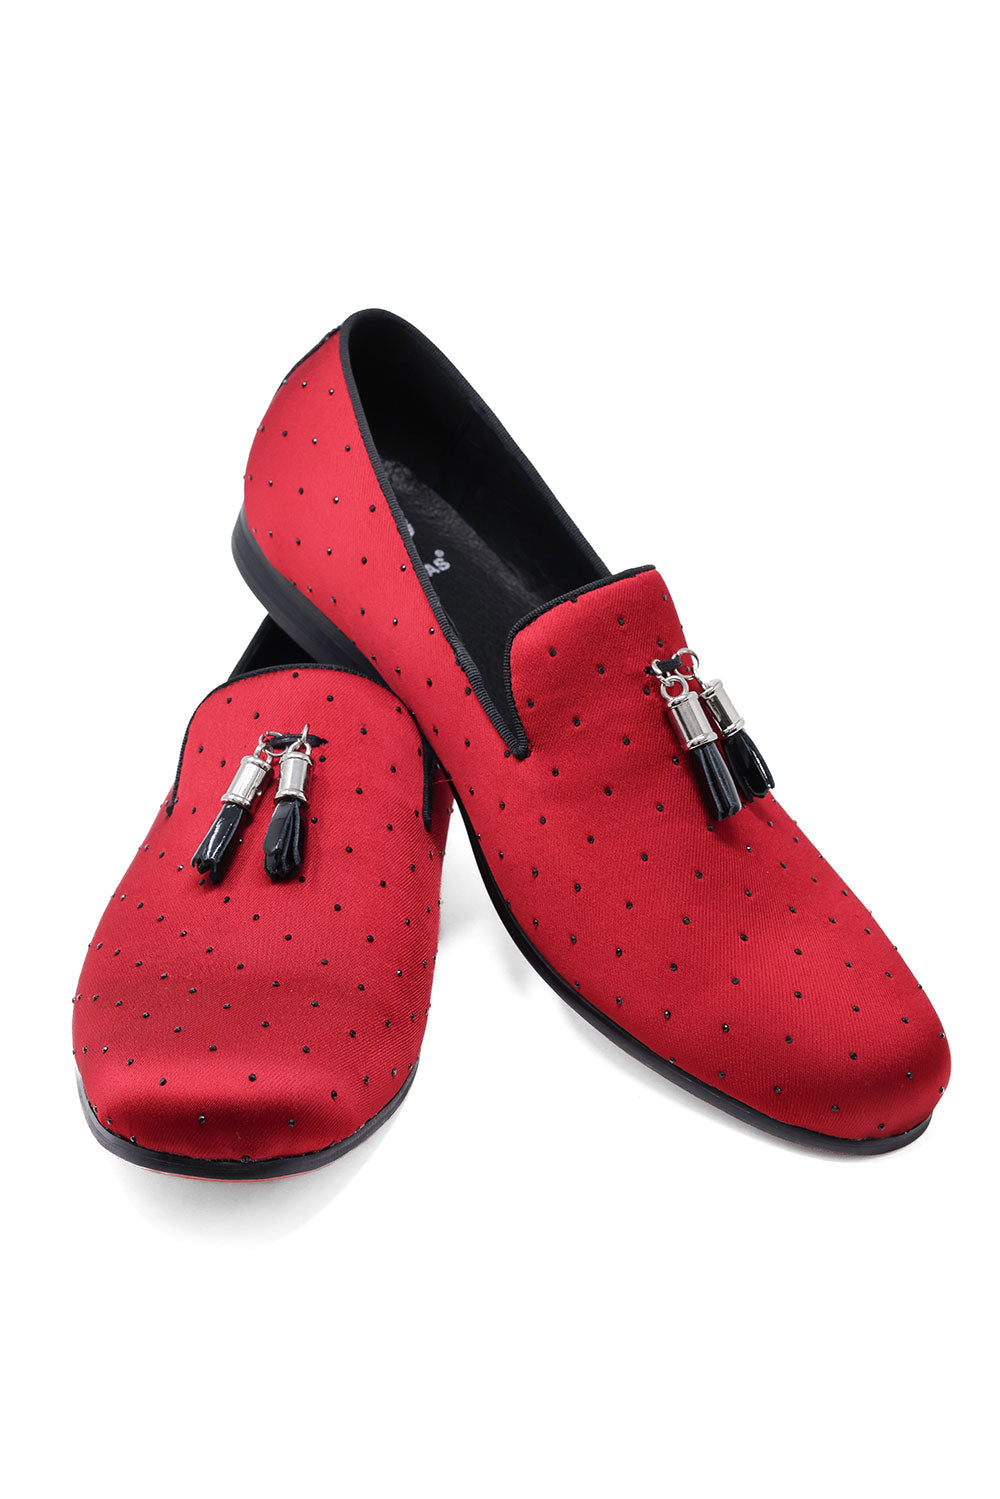 solid life Tassel Loafers